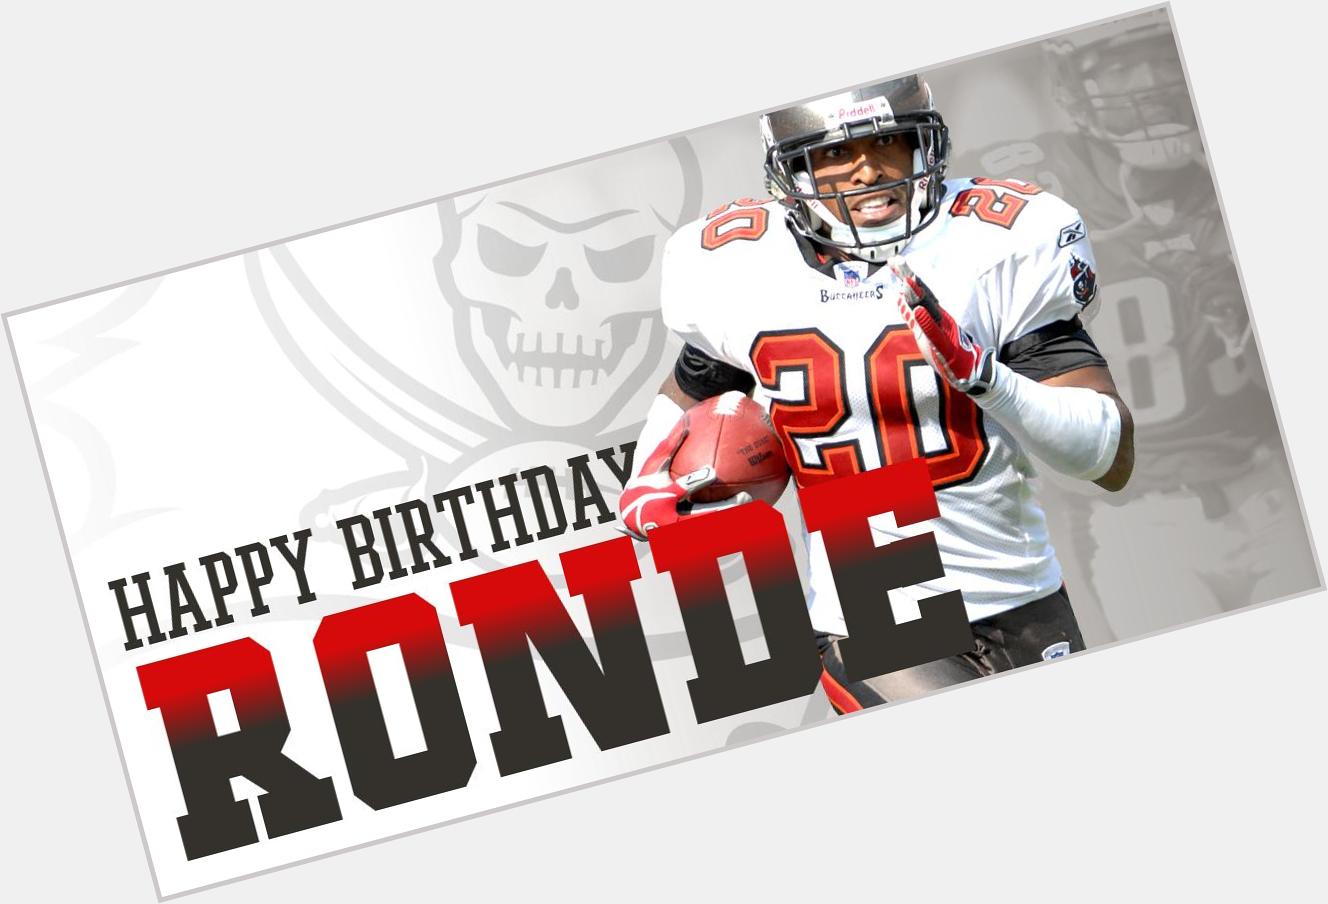 To wish legend Ronde Barber a Happy Birthday!  

Photos of Ronde through the years:  